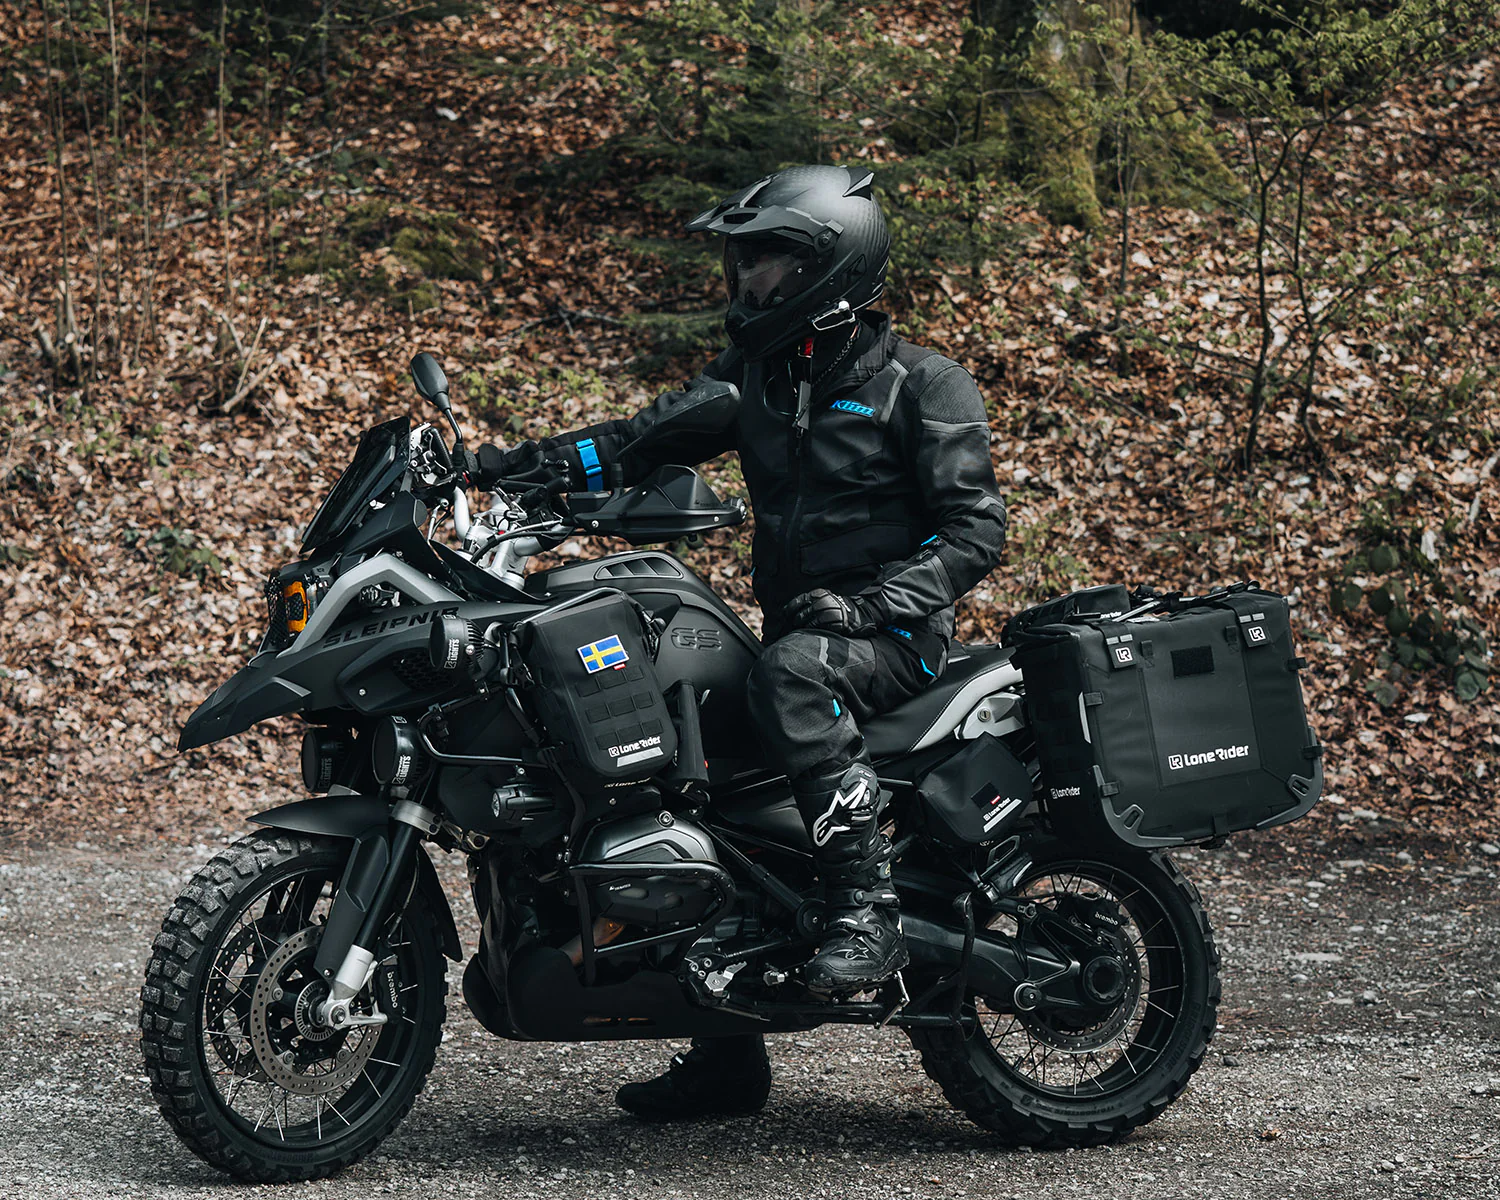 Dwelling on the Unknown: The Art of Motorcycling